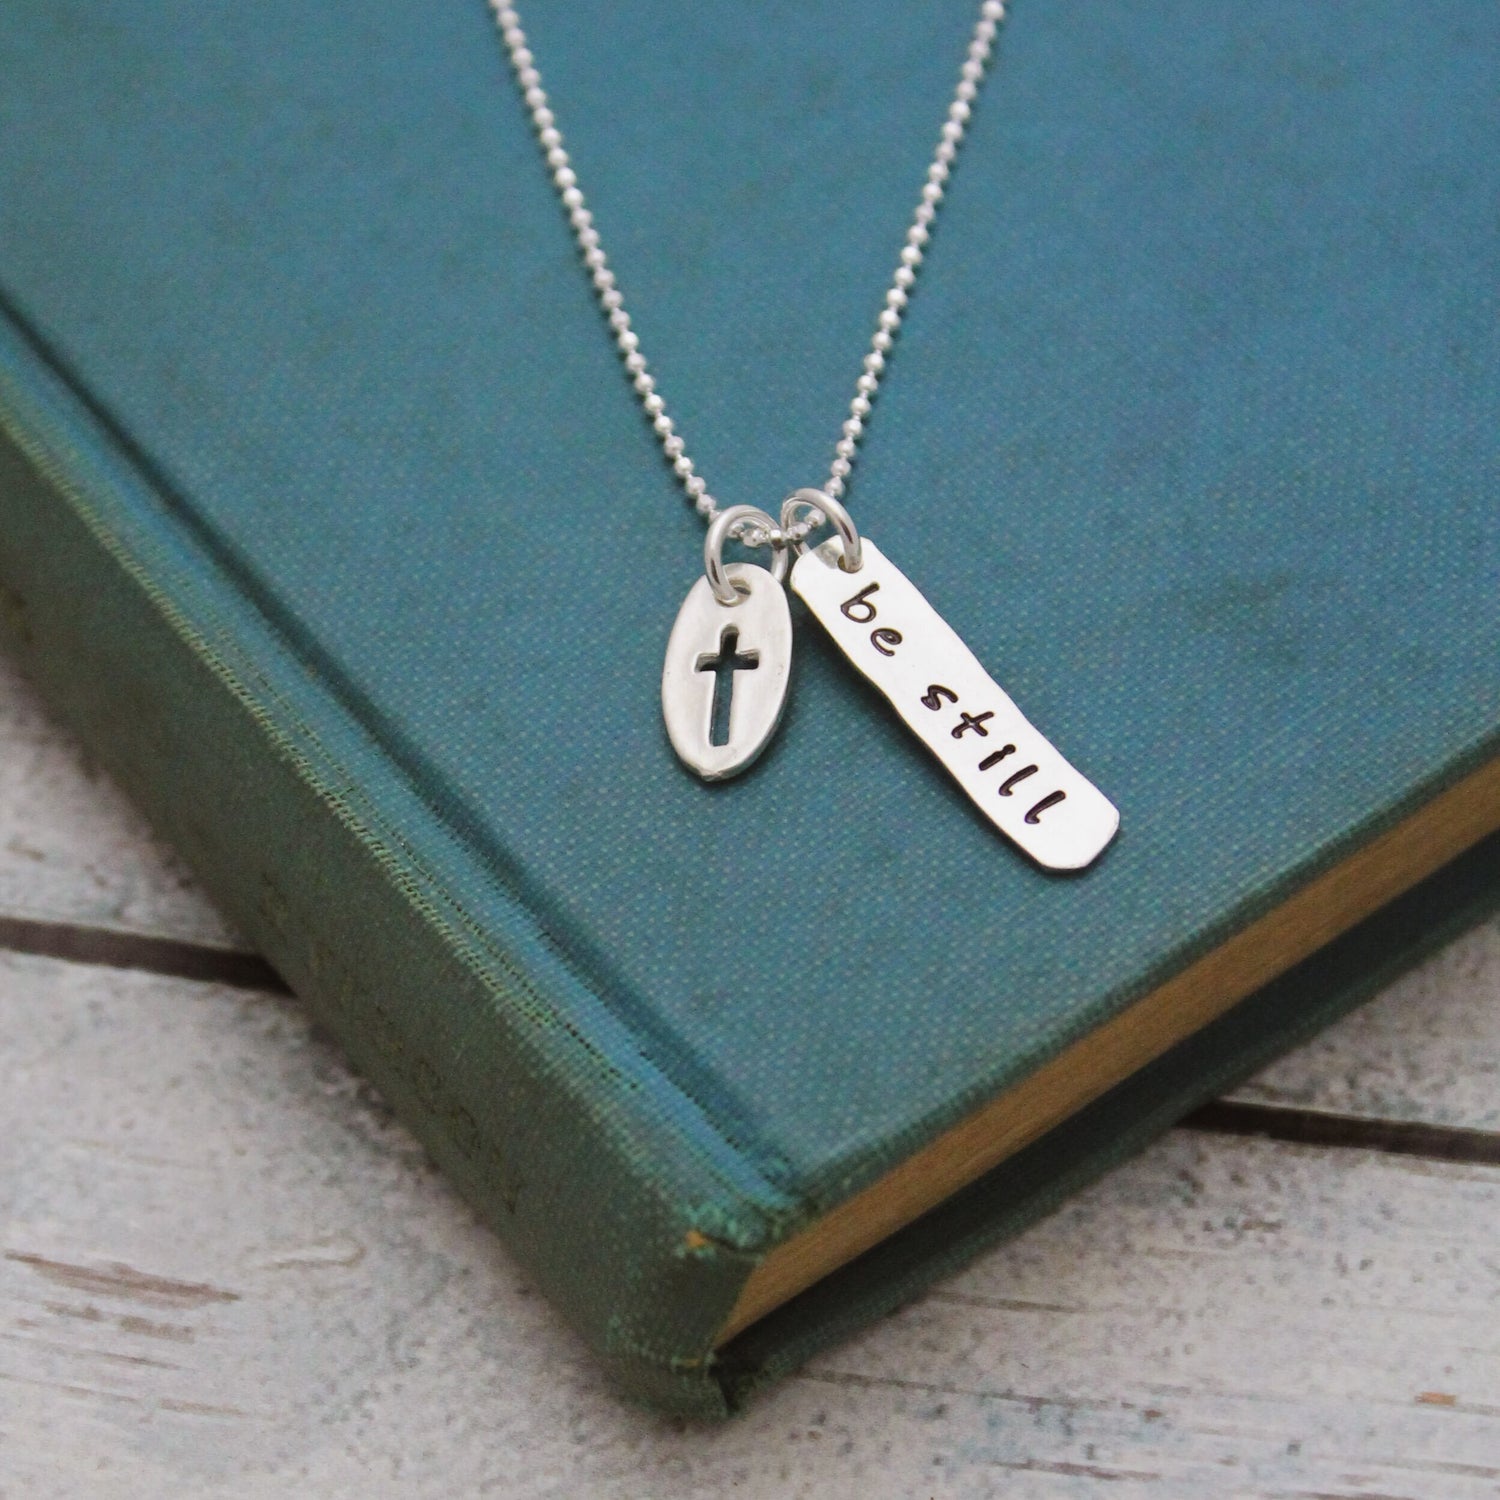 Be Still Cross Charm Necklace, Confirmation Cross Necklace, First Communion Cross Necklace, Personalized Hand Stamped Jewelry